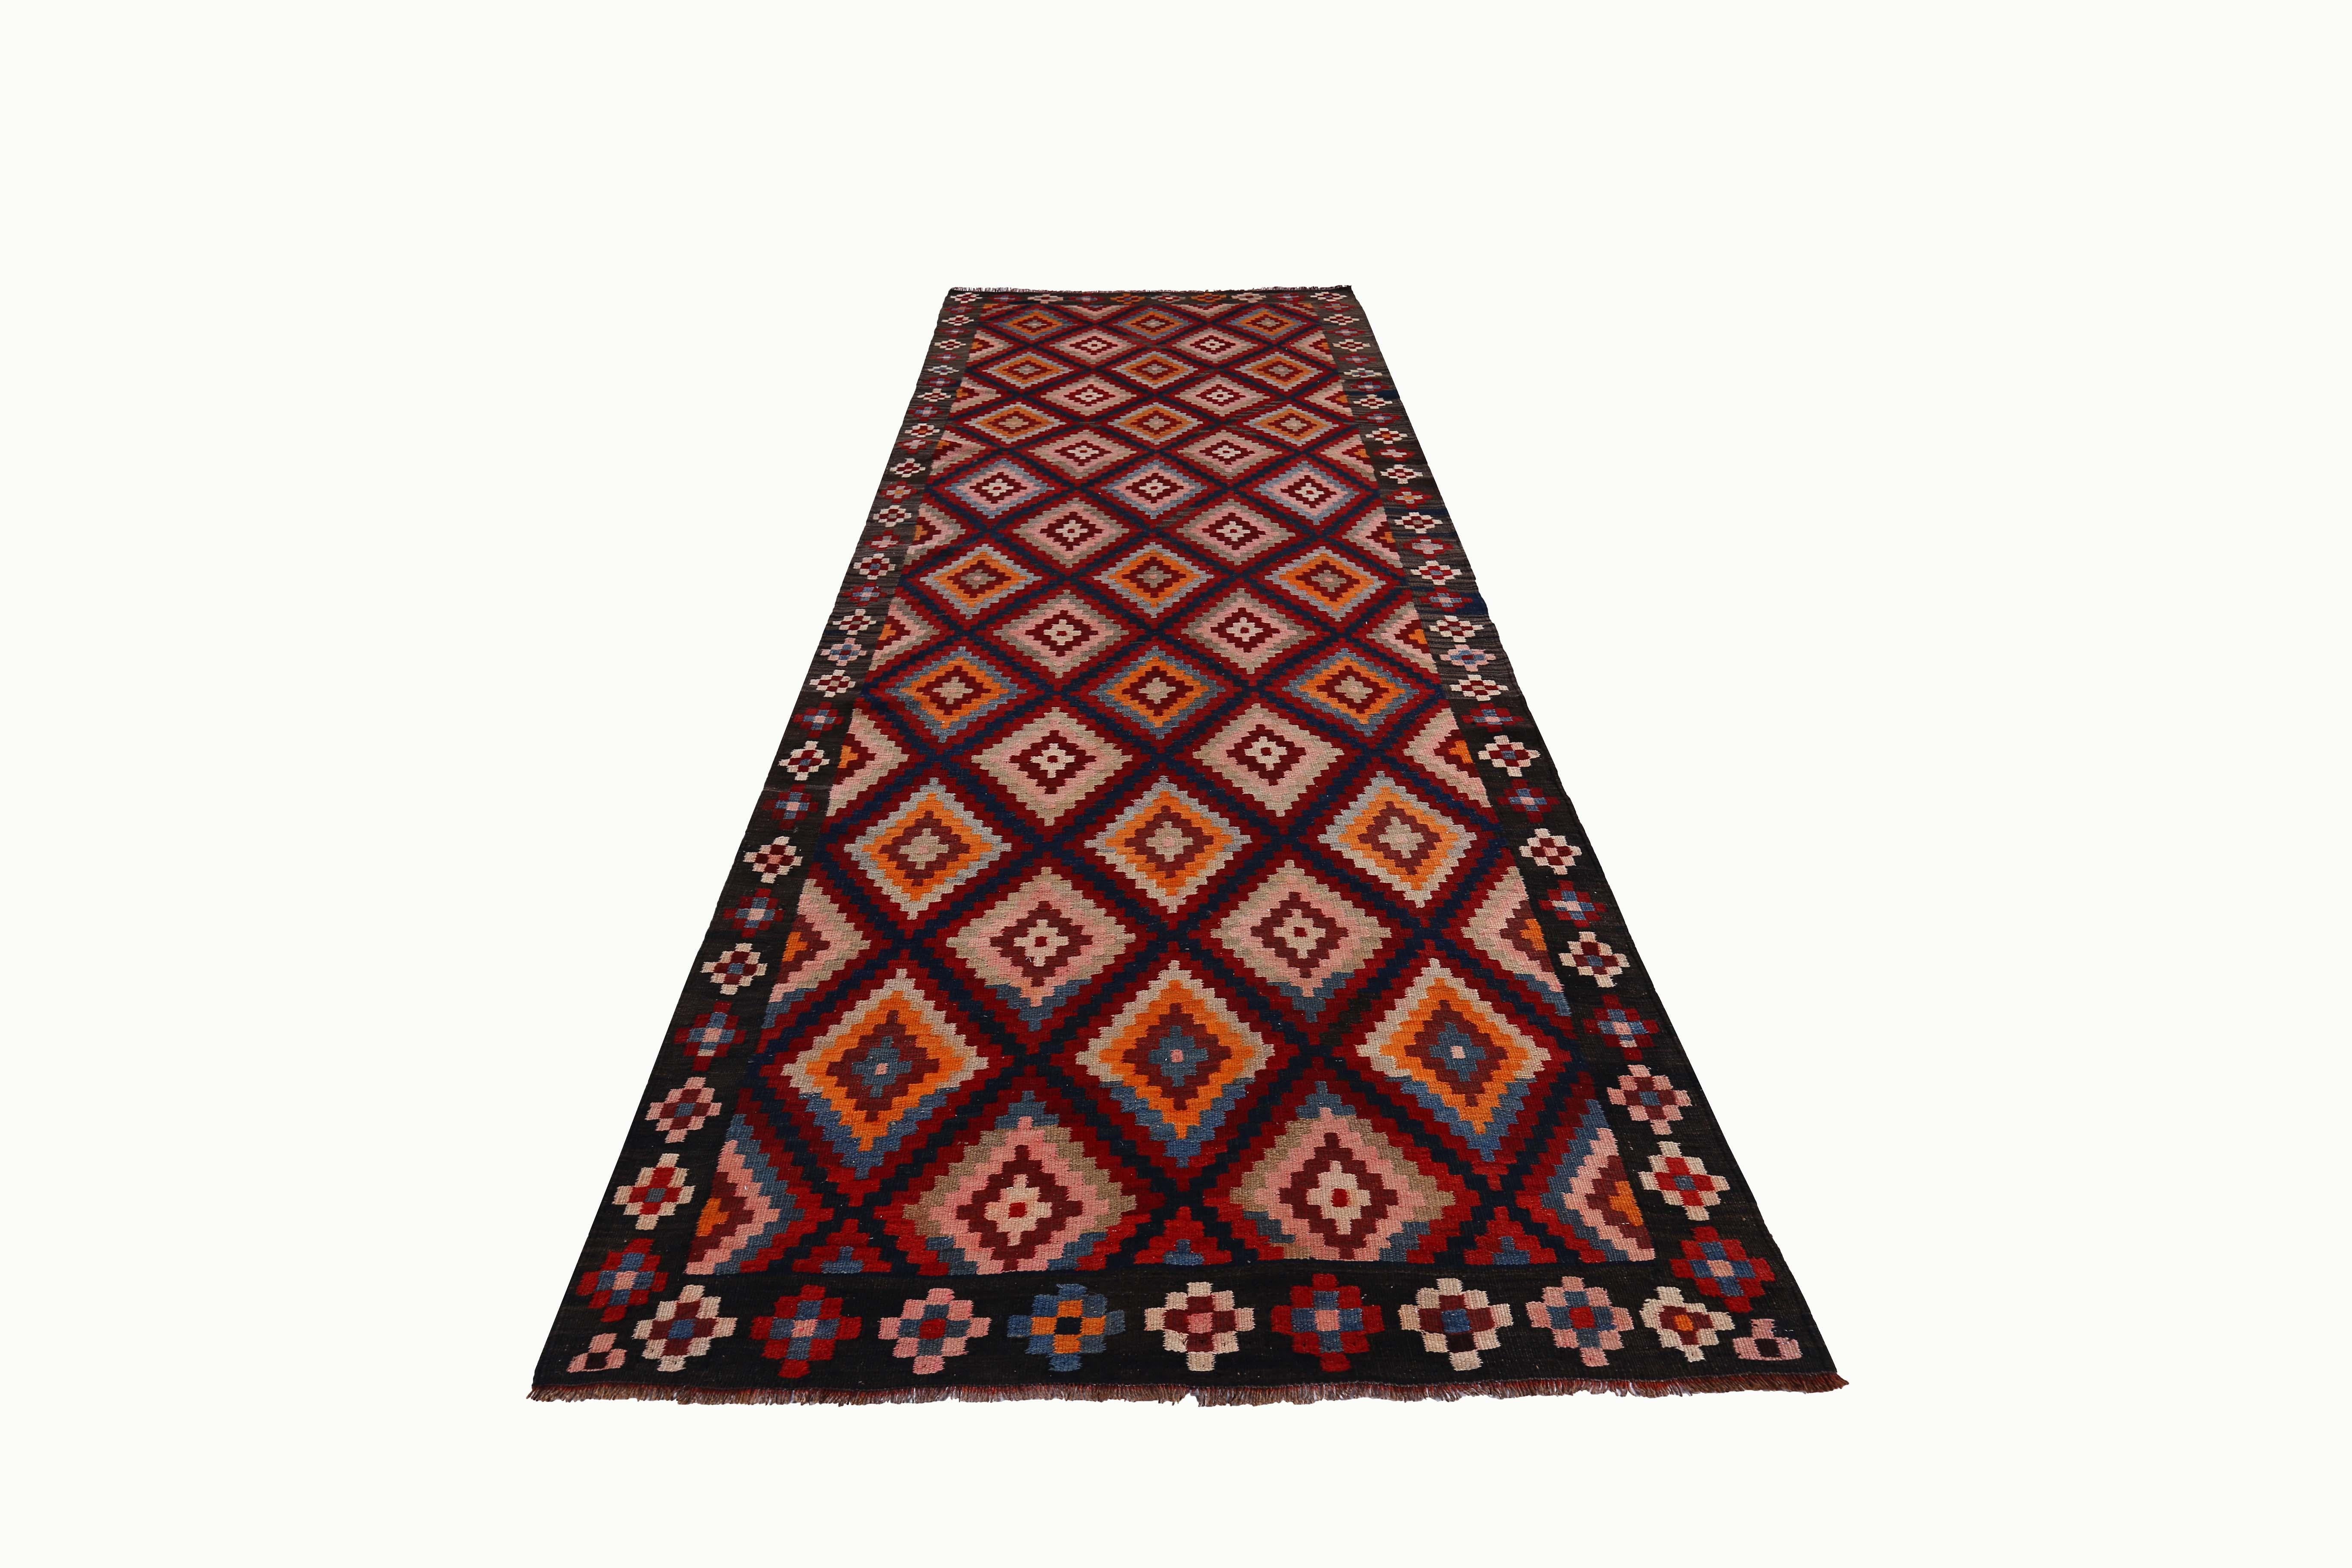 Turkish rug handwoven from the finest sheep’s wool and colored with all-natural vegetable dyes that are safe for humans and pets. It’s a traditional Kilim flat-weave design featuring red, orange and pink diamond design. It’s a stunning piece to get